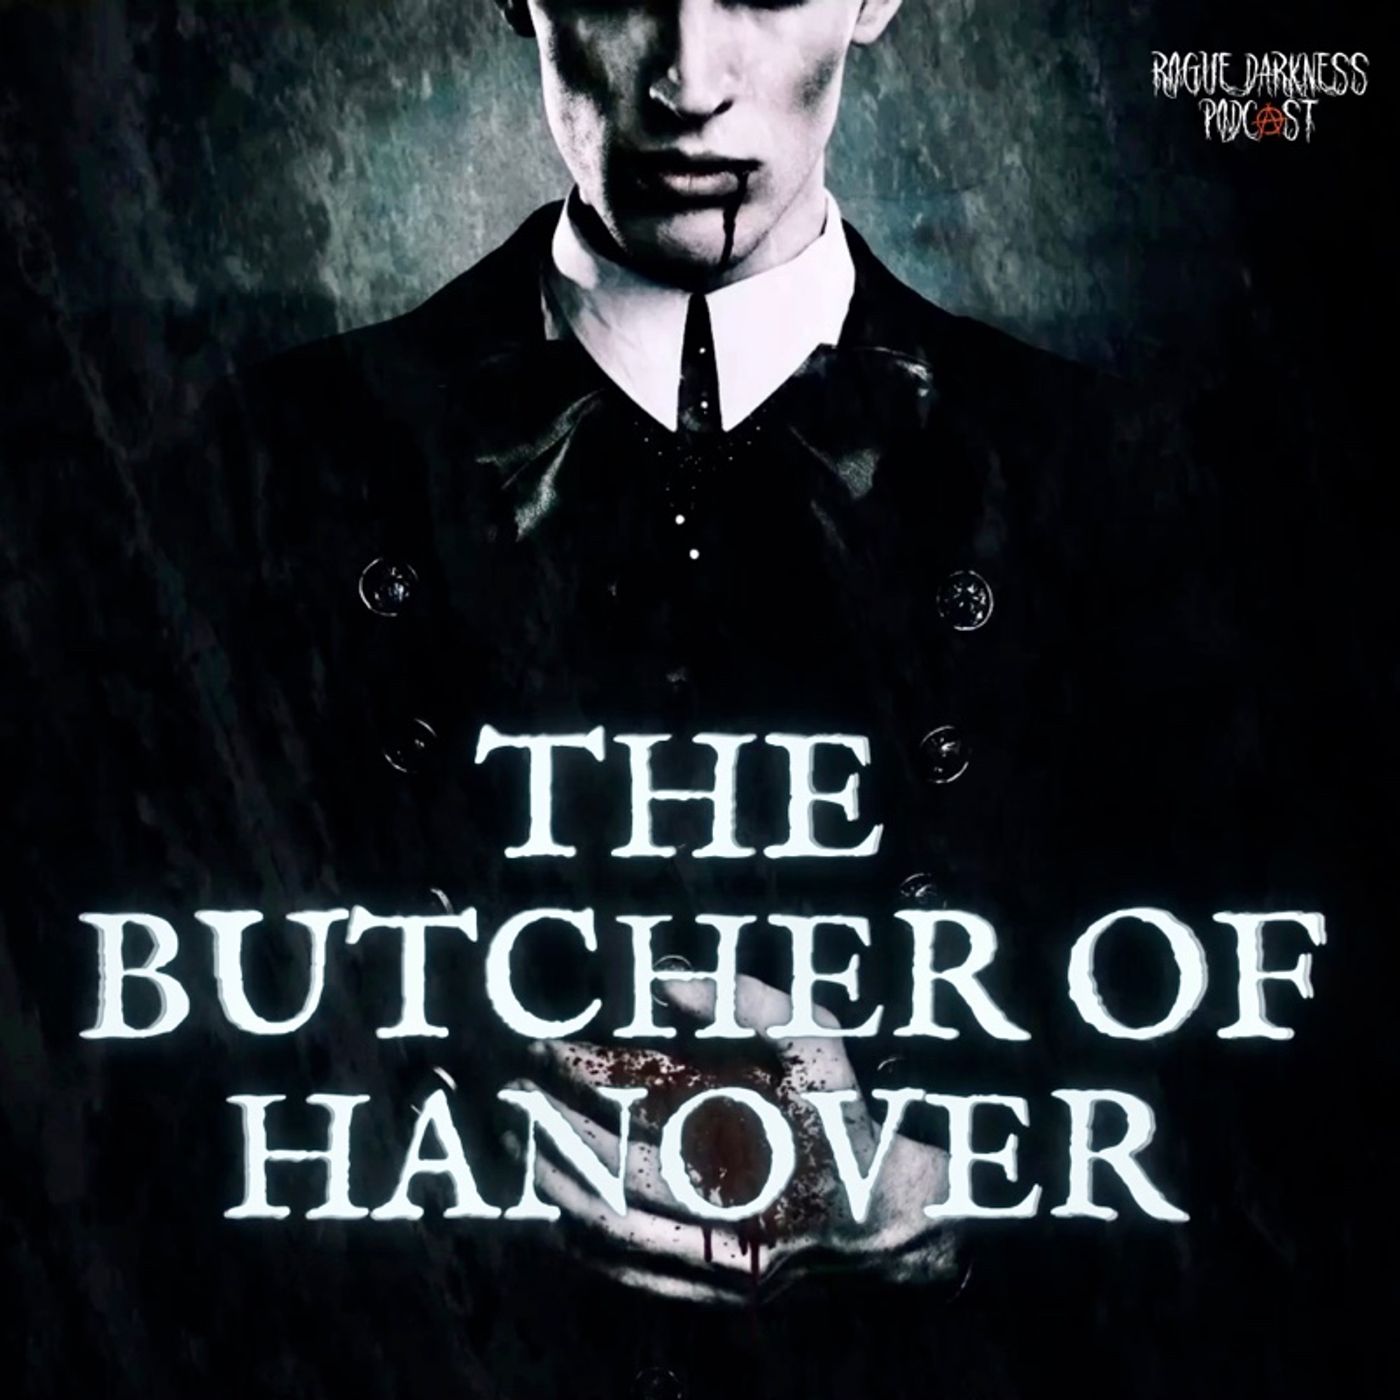 LXIII: The Butcher of Hanover